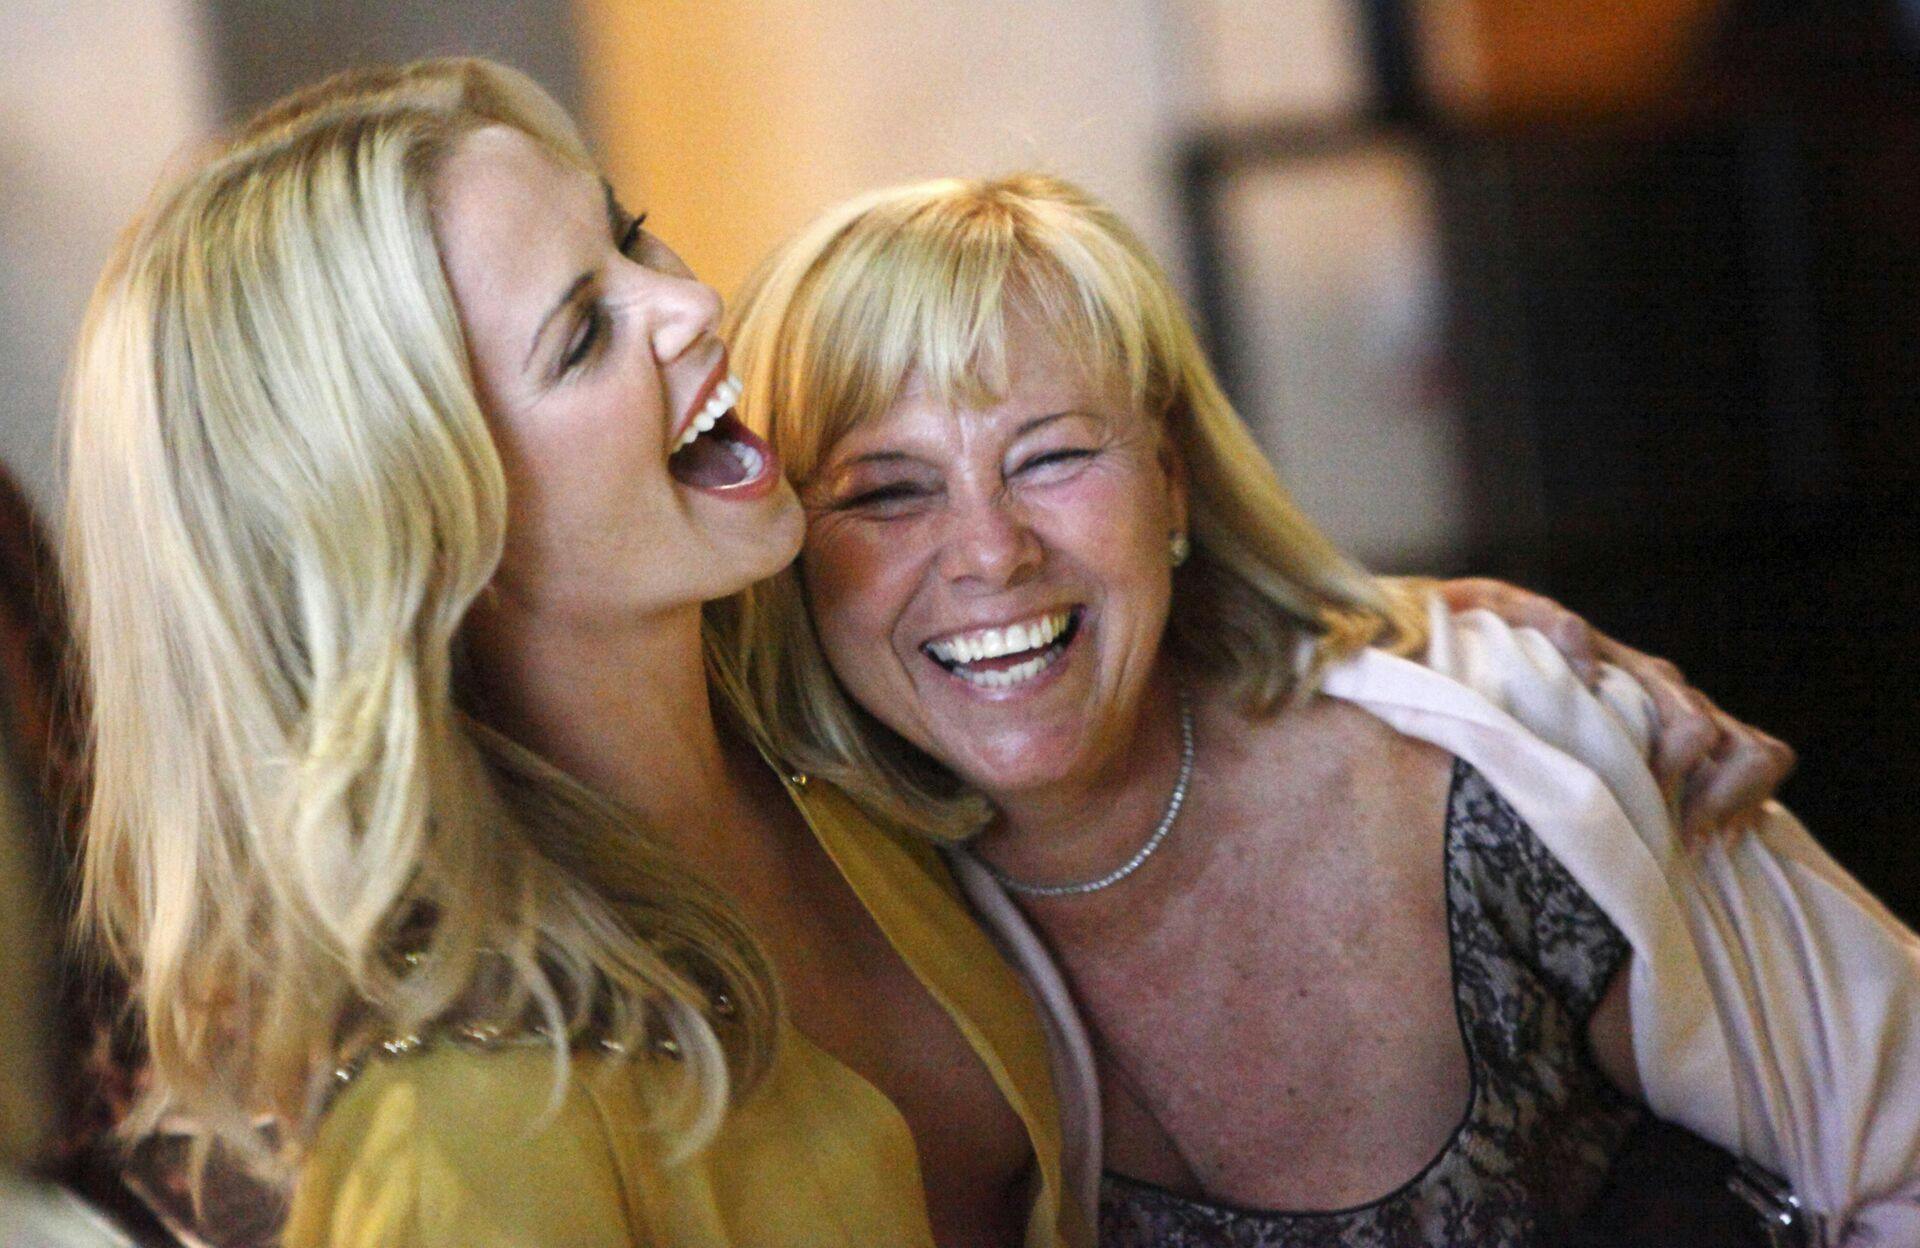 South African actress Charlize Theron (L) laughs with her mom Gerda as she arrives for the premiere party of the film "The Burning Plain" in Los Angeles, September 14, 2009. REUTERS/Danny Moloshok (UNITED STATES ENTERTAINMENT)